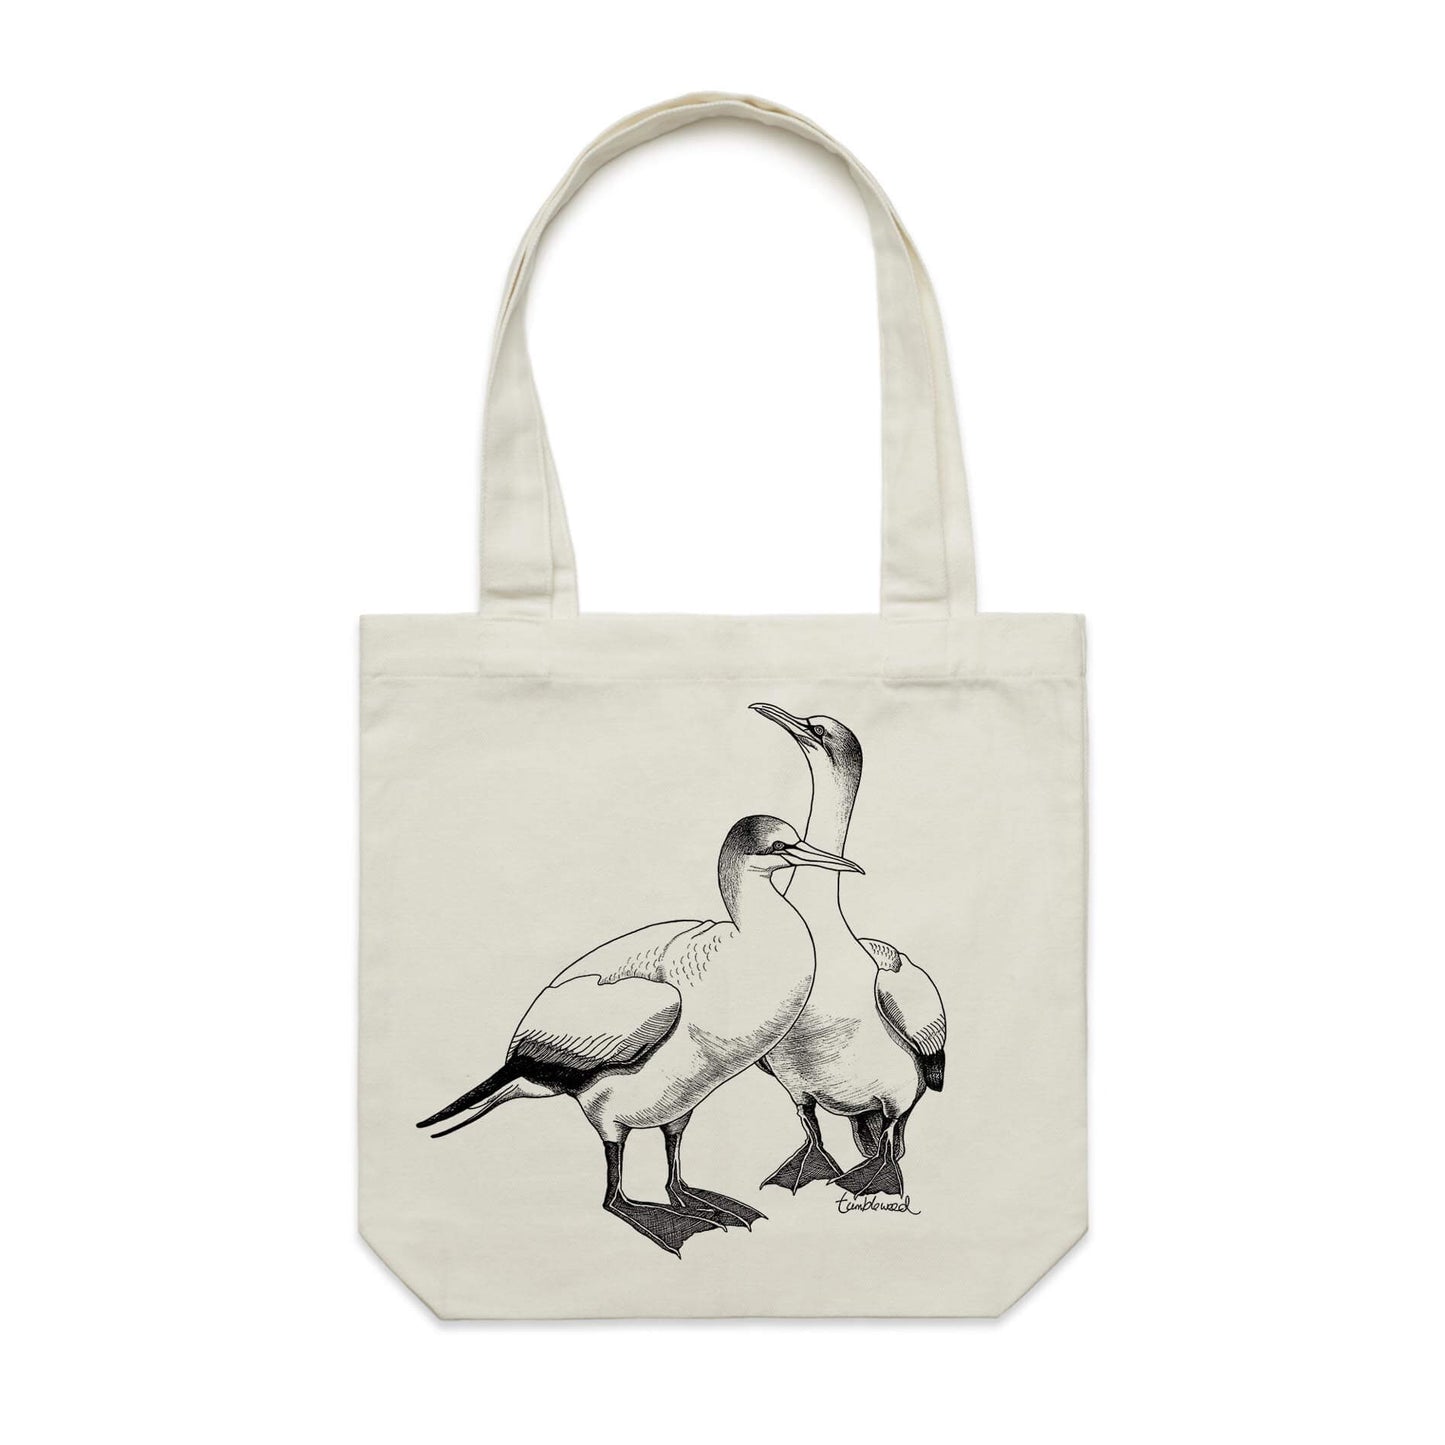 Cotton canvas tote bag with a screen printed Gannet design.